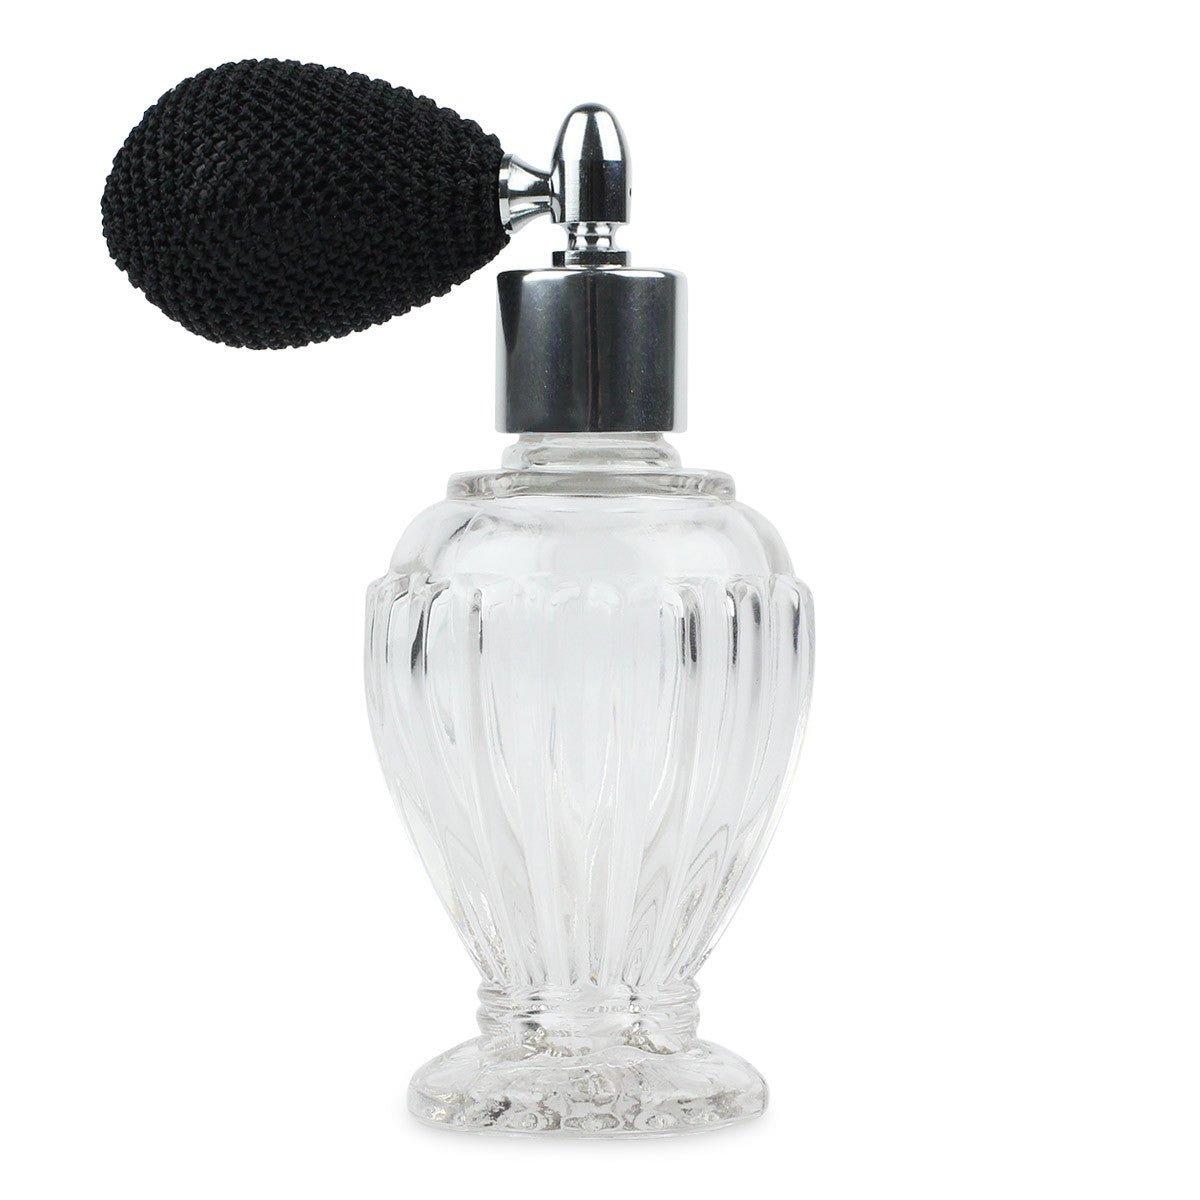 Primary image of Glass Atomizer with Black Antique Style Sprayer